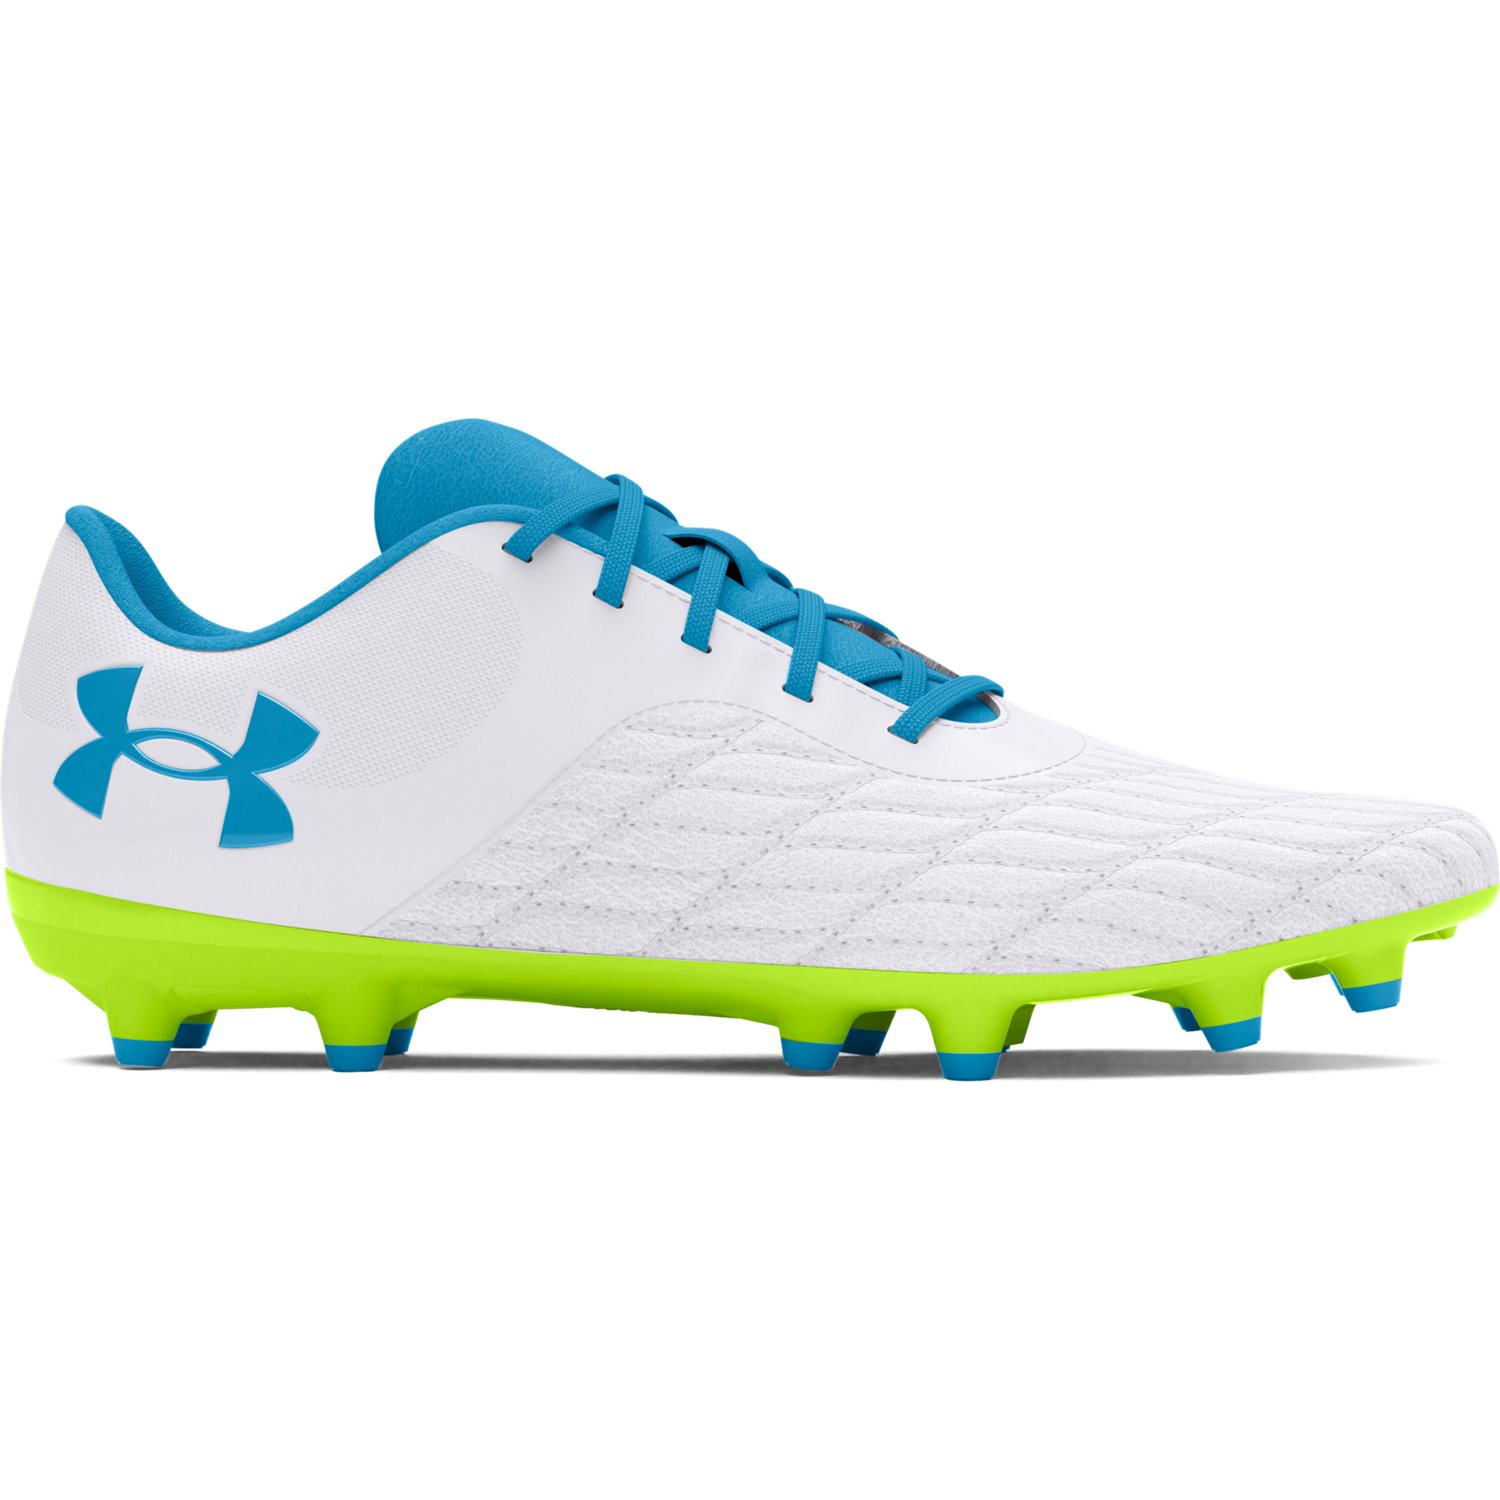 Under Armour Adults Magnetico Select 3.0 Firm Ground Soccer Cleats